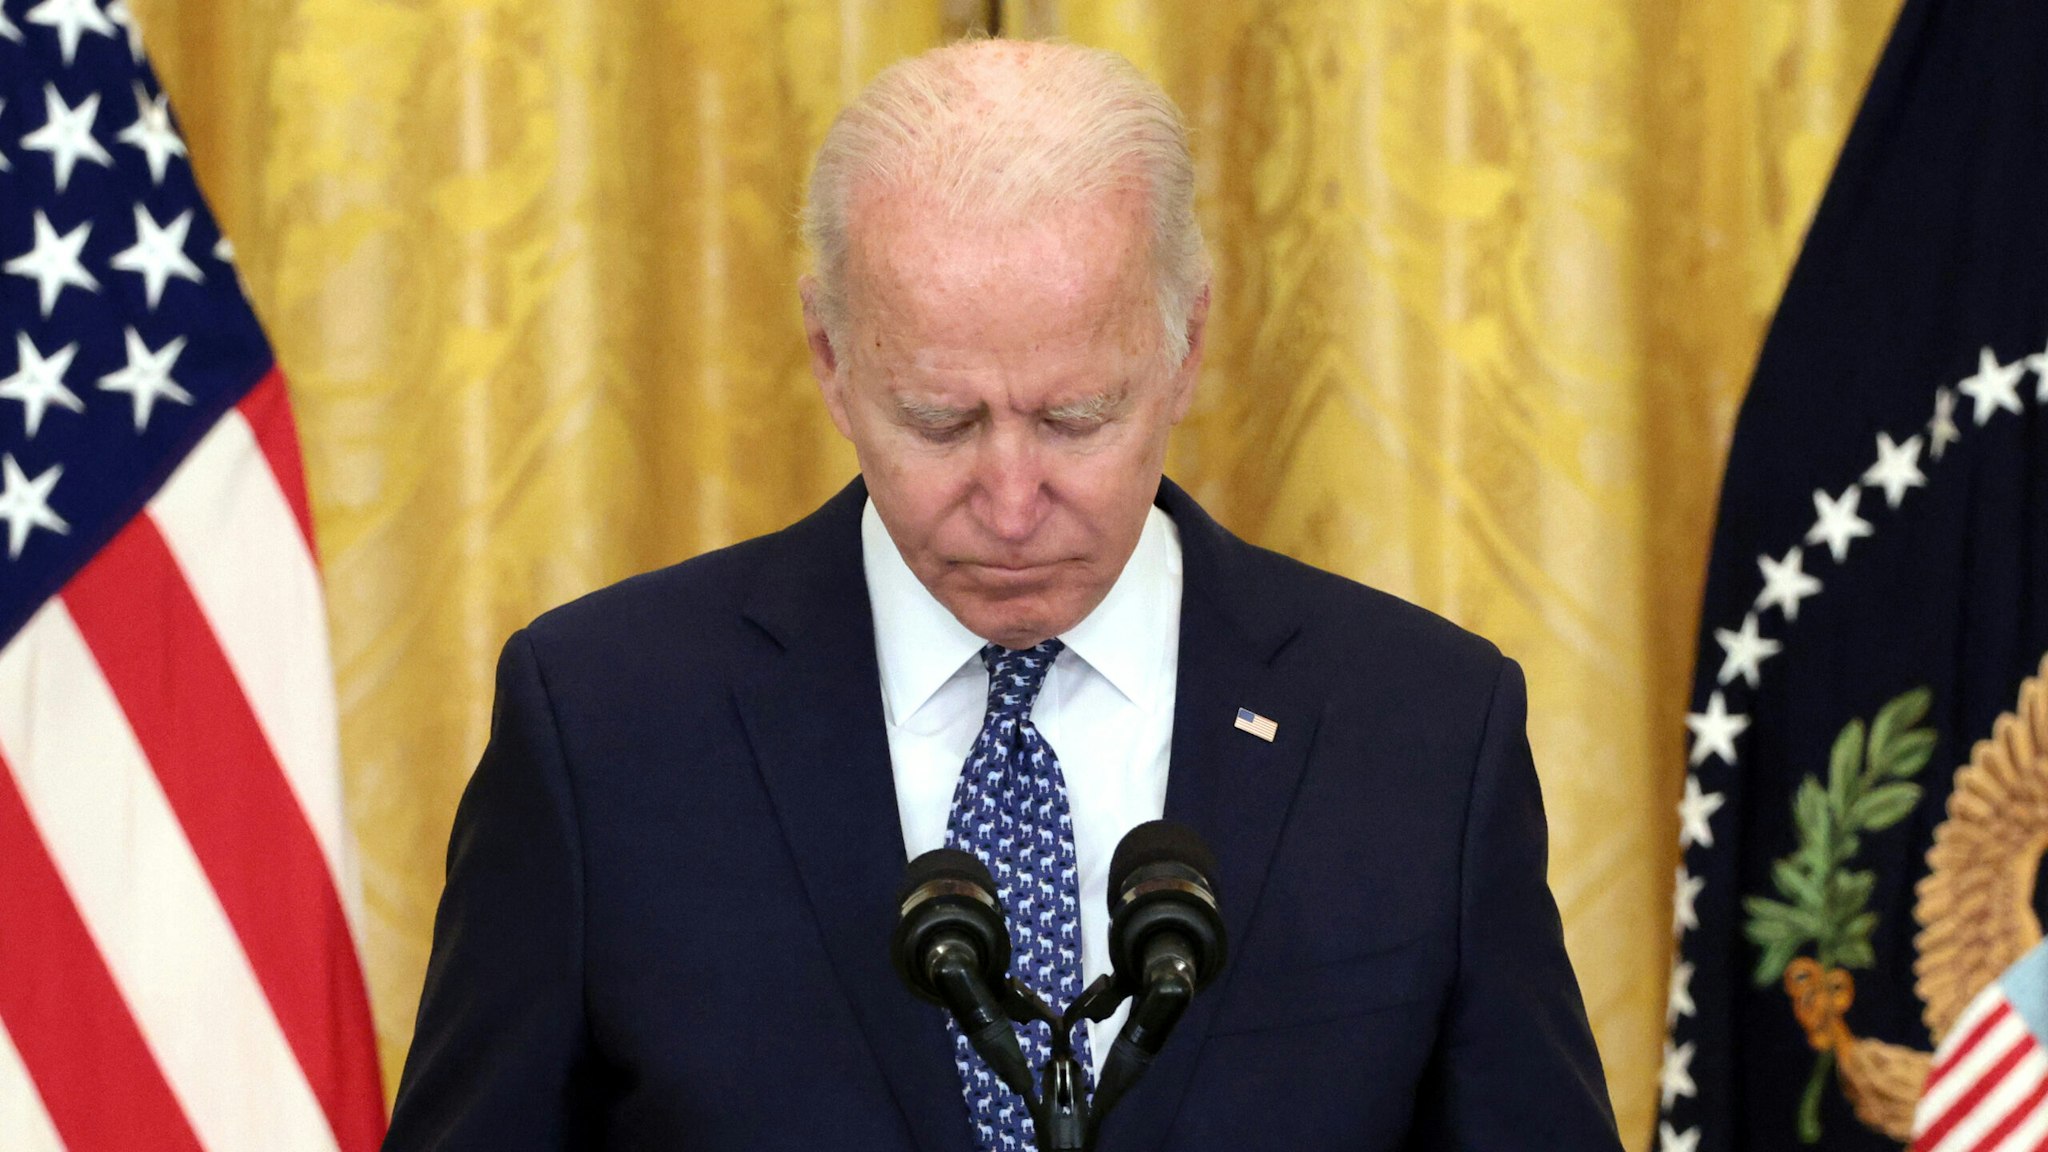 WASHINGTON, DC - SEPTEMBER 08: U.S. President Joe Biden holds a moment of silence for workers who have died from the COVID-19 pandemic as he speaks on workers rights and labor unions in the East Room at the White House on September 08, 2021 in Washington, DC. Biden spoke on the need to protect workers rights and the middle class.